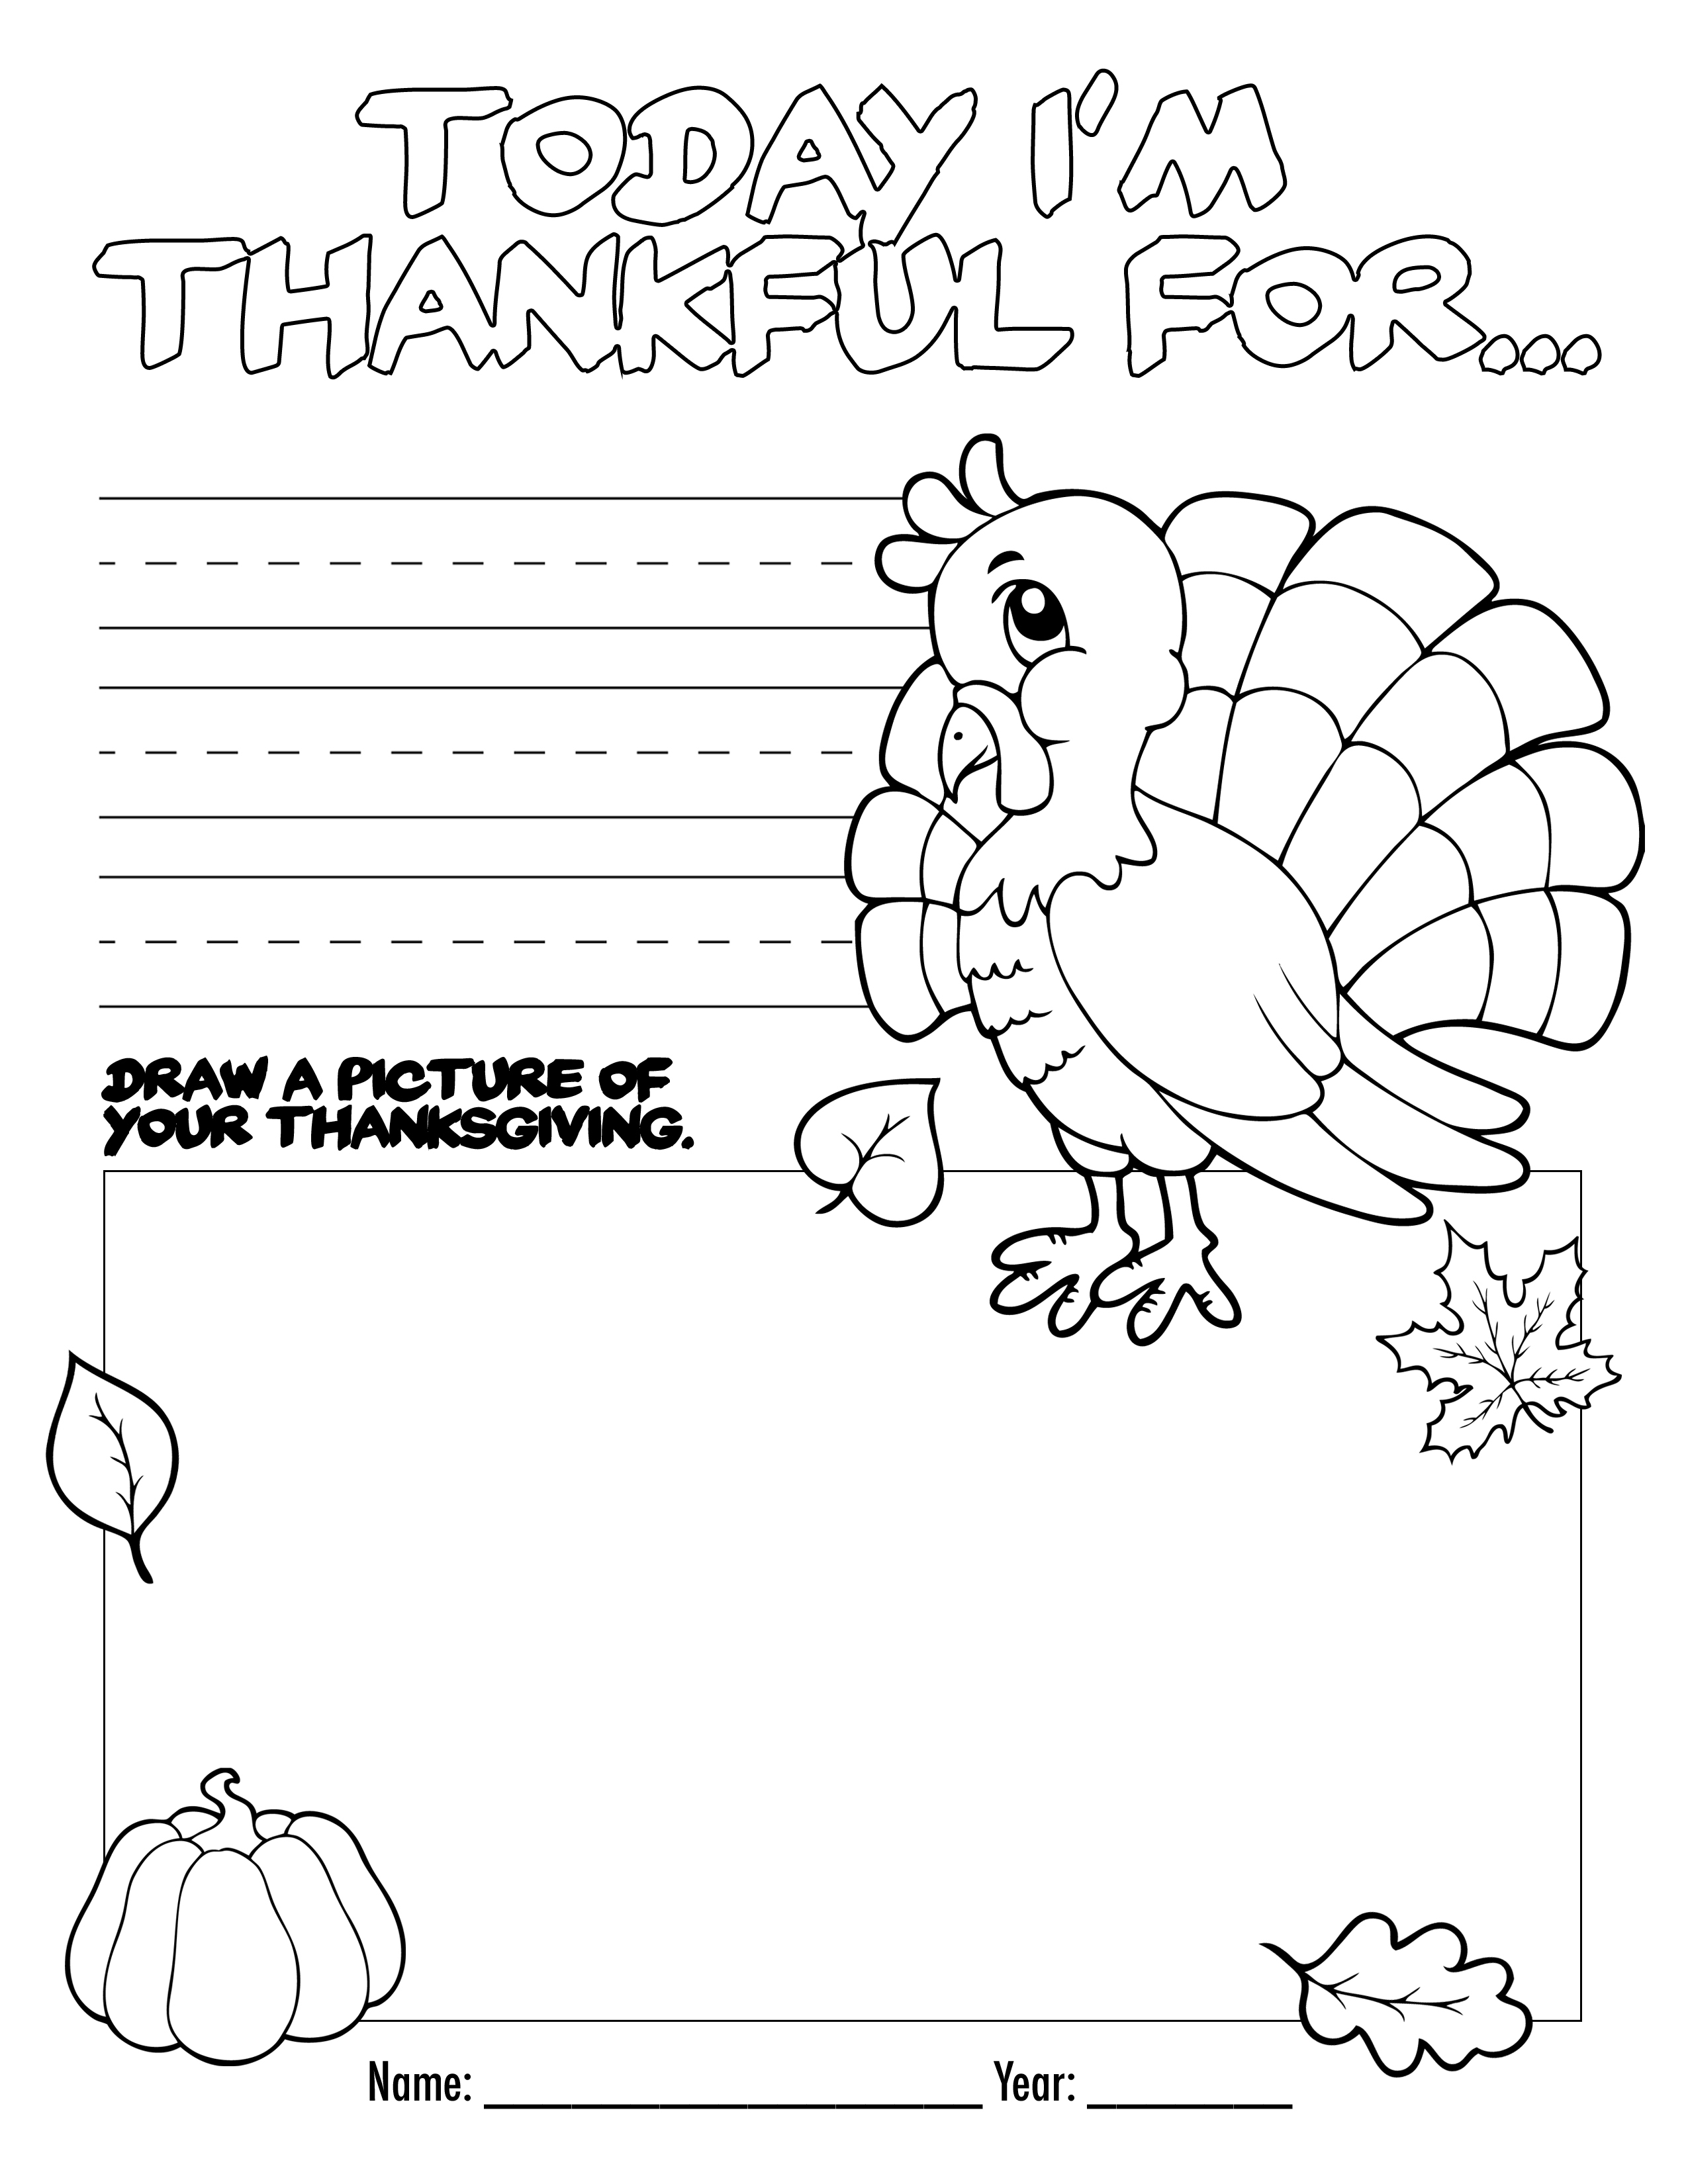 Thanksgiving Coloring Book Free Printable For The Kids! - Free Printable Thanksgiving Activities